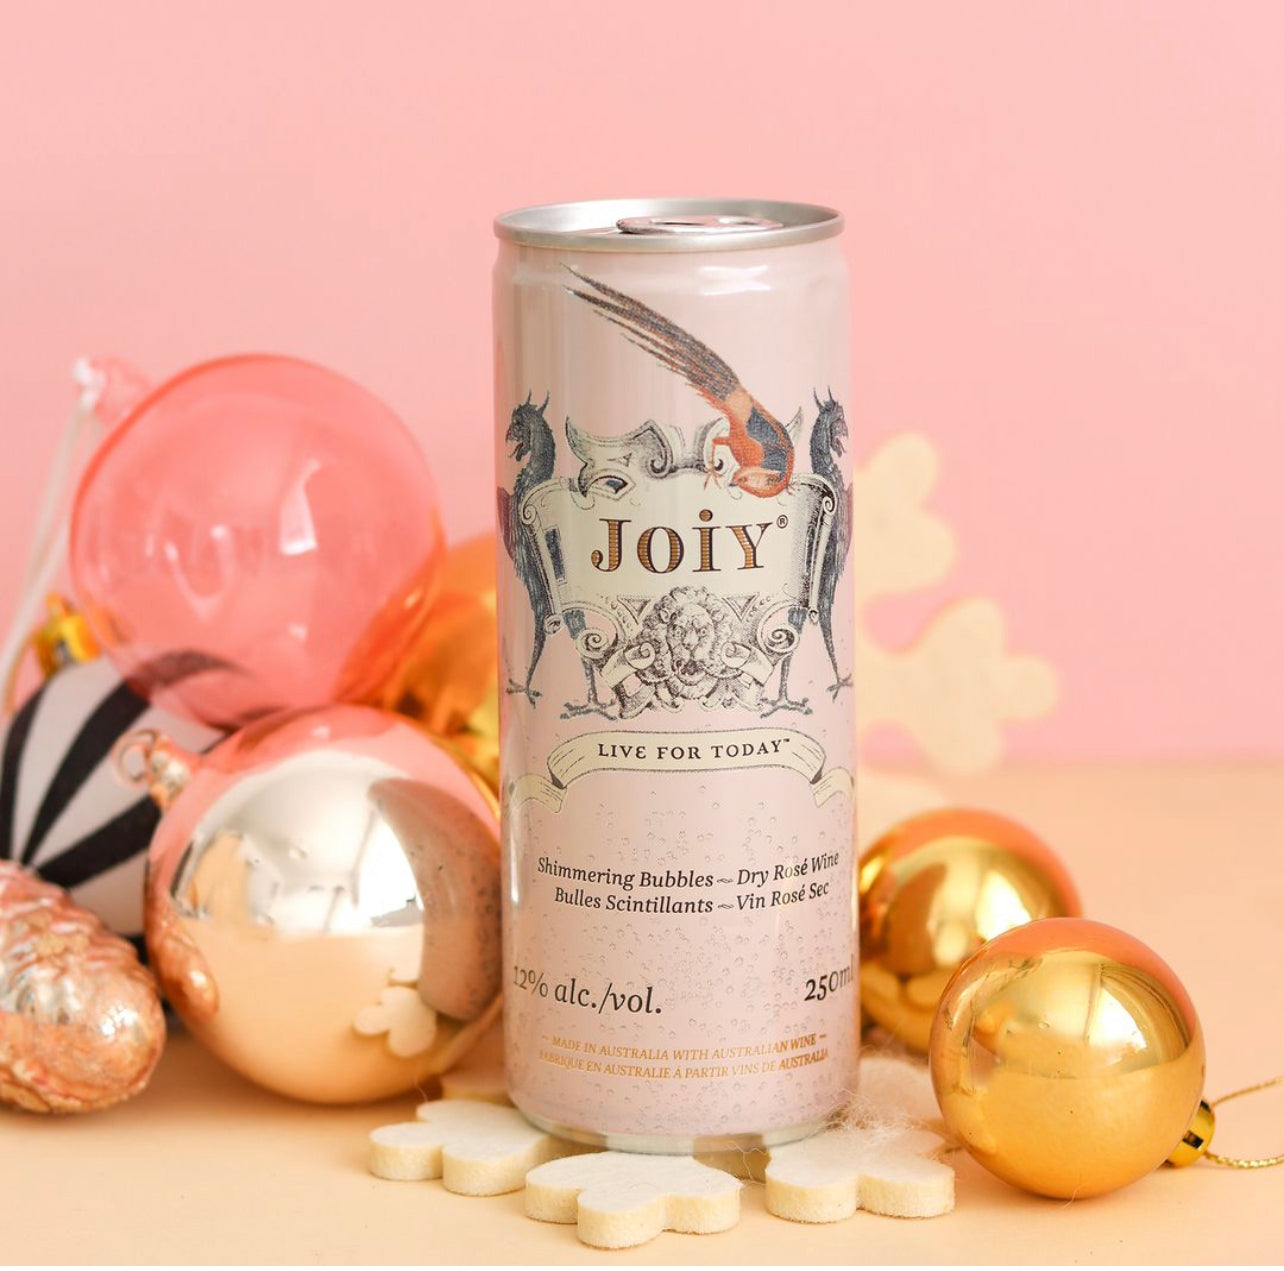 Joiy Canned Wine - Sparkling Rose